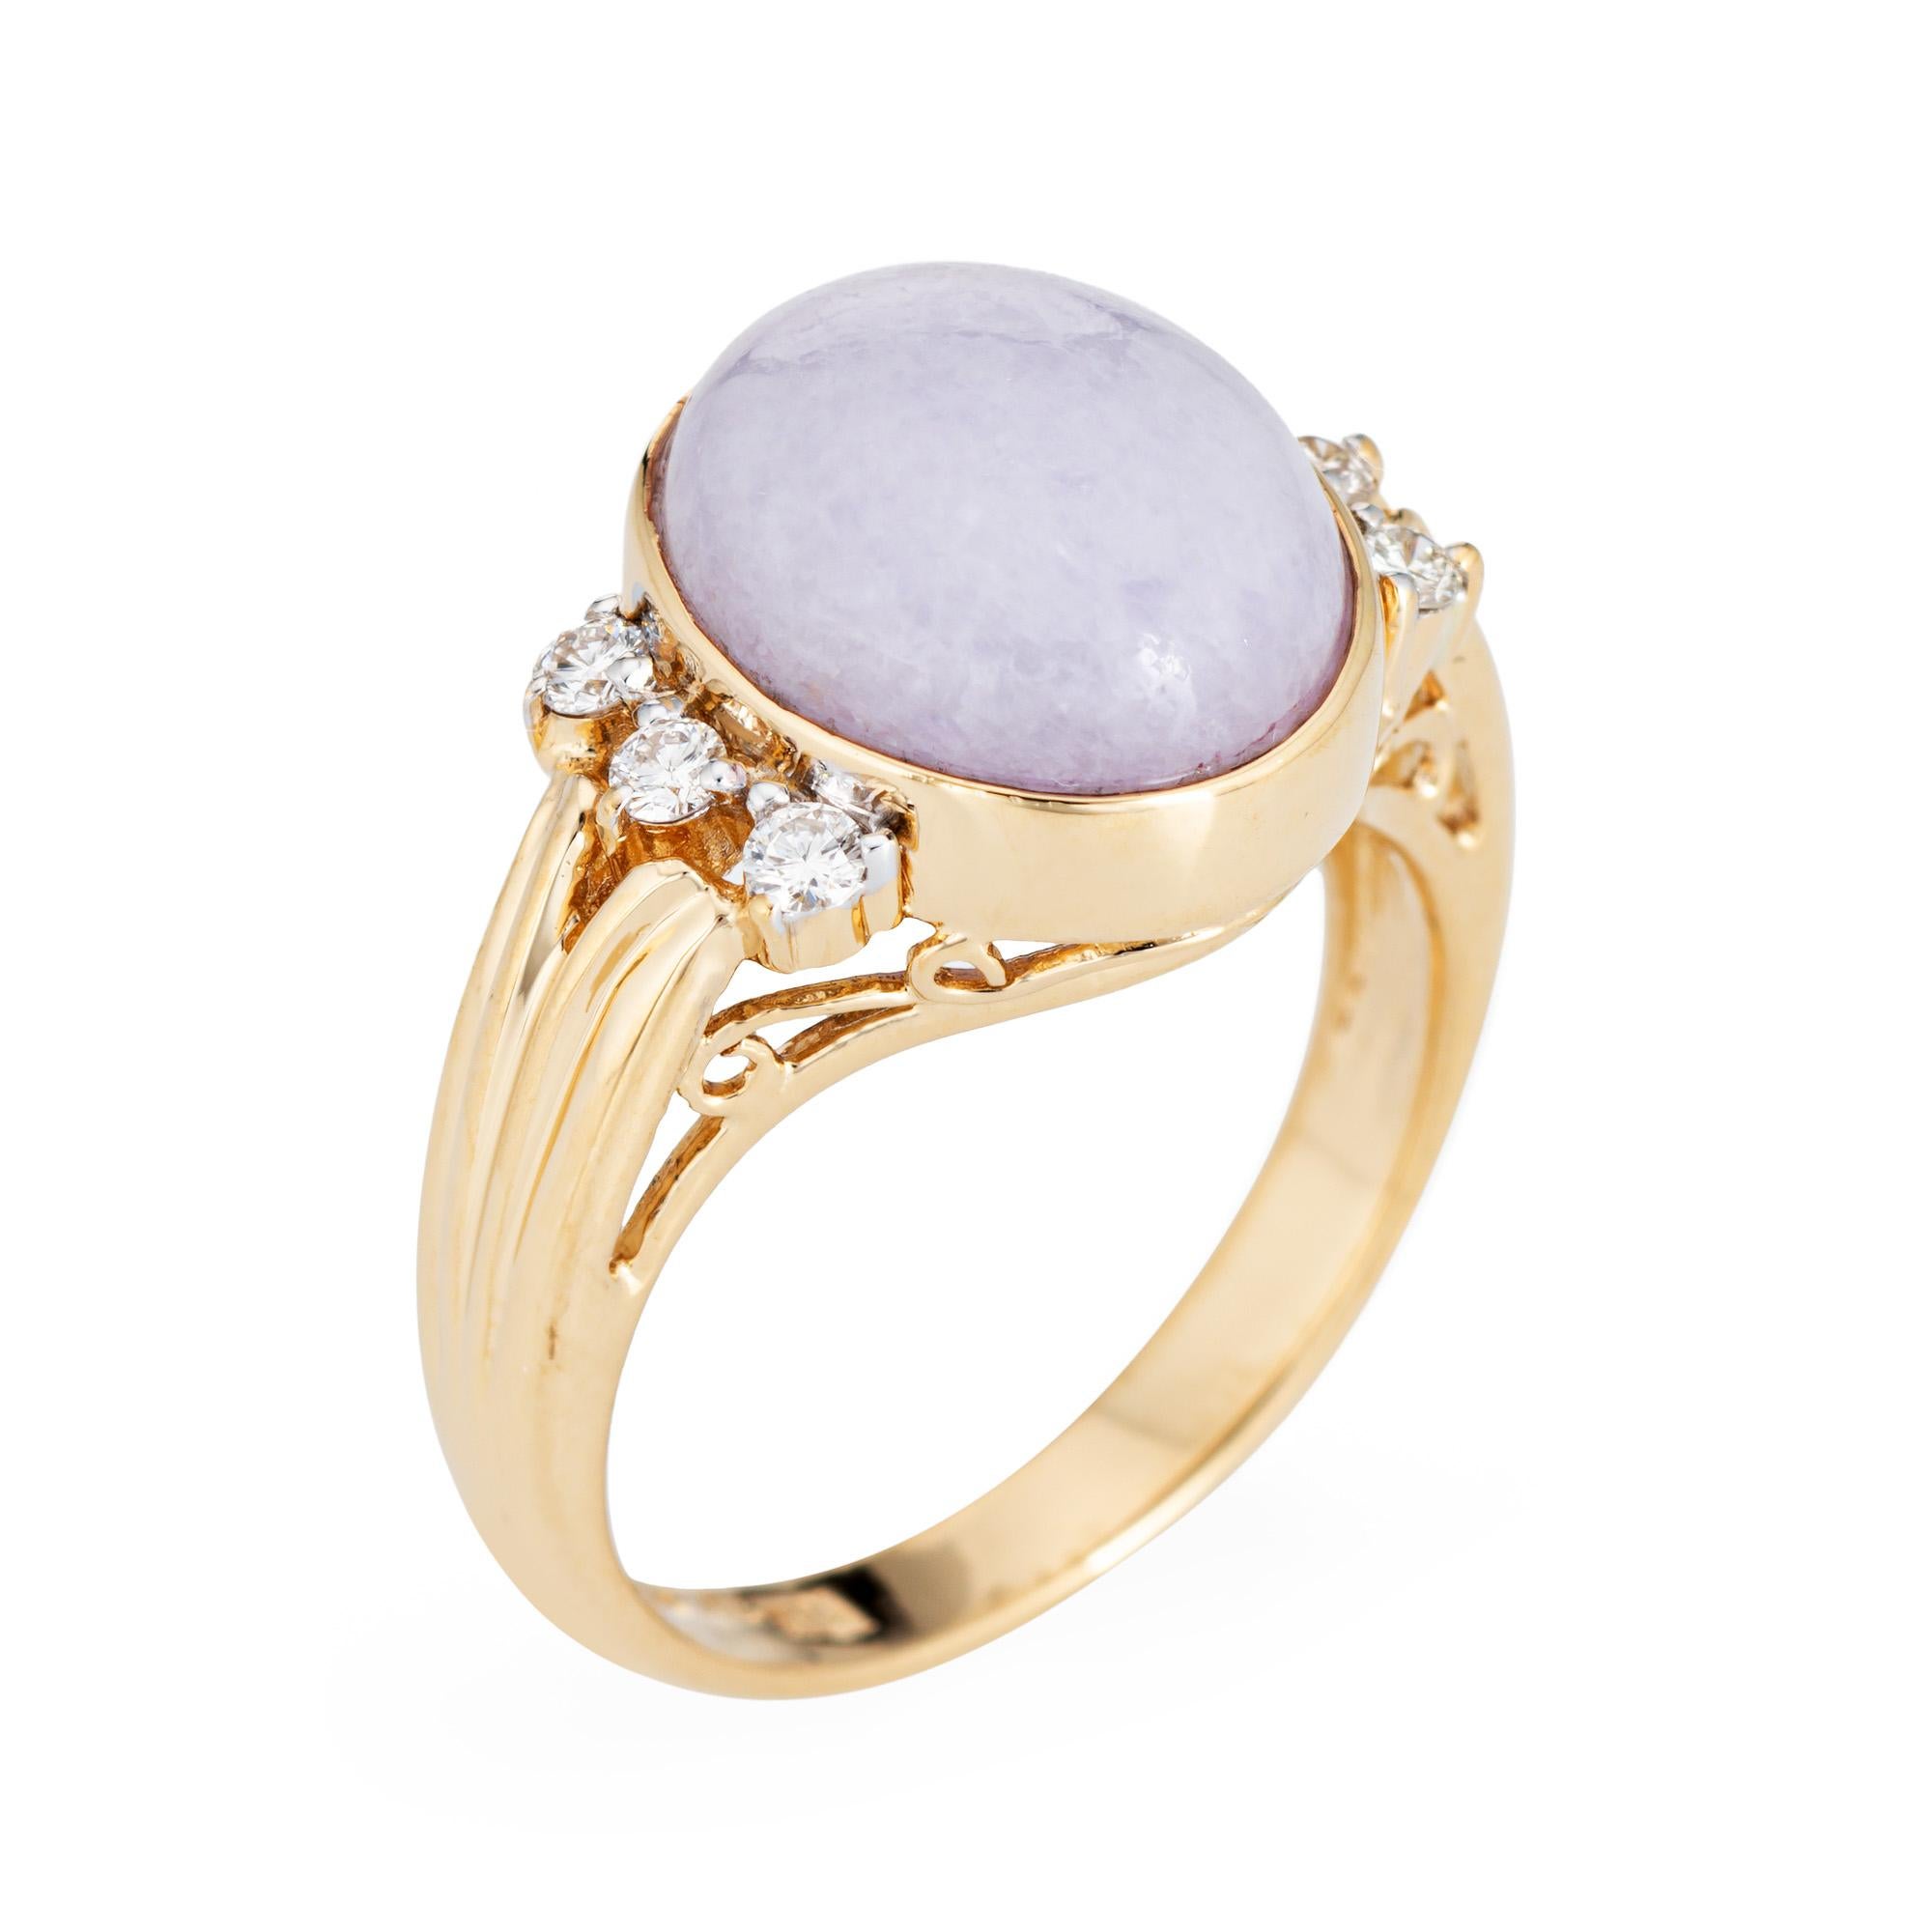 Stylish and finely detailed lavender jade & diamond ring crafted in 14 karat yellow gold (circa 1970s to 1980s).

Cabochon cut lavender jade measures 11.5mm x 10mm (estimated at 6 carats). 6 diamonds total an estimated 0.18 carats (estimated at H-I